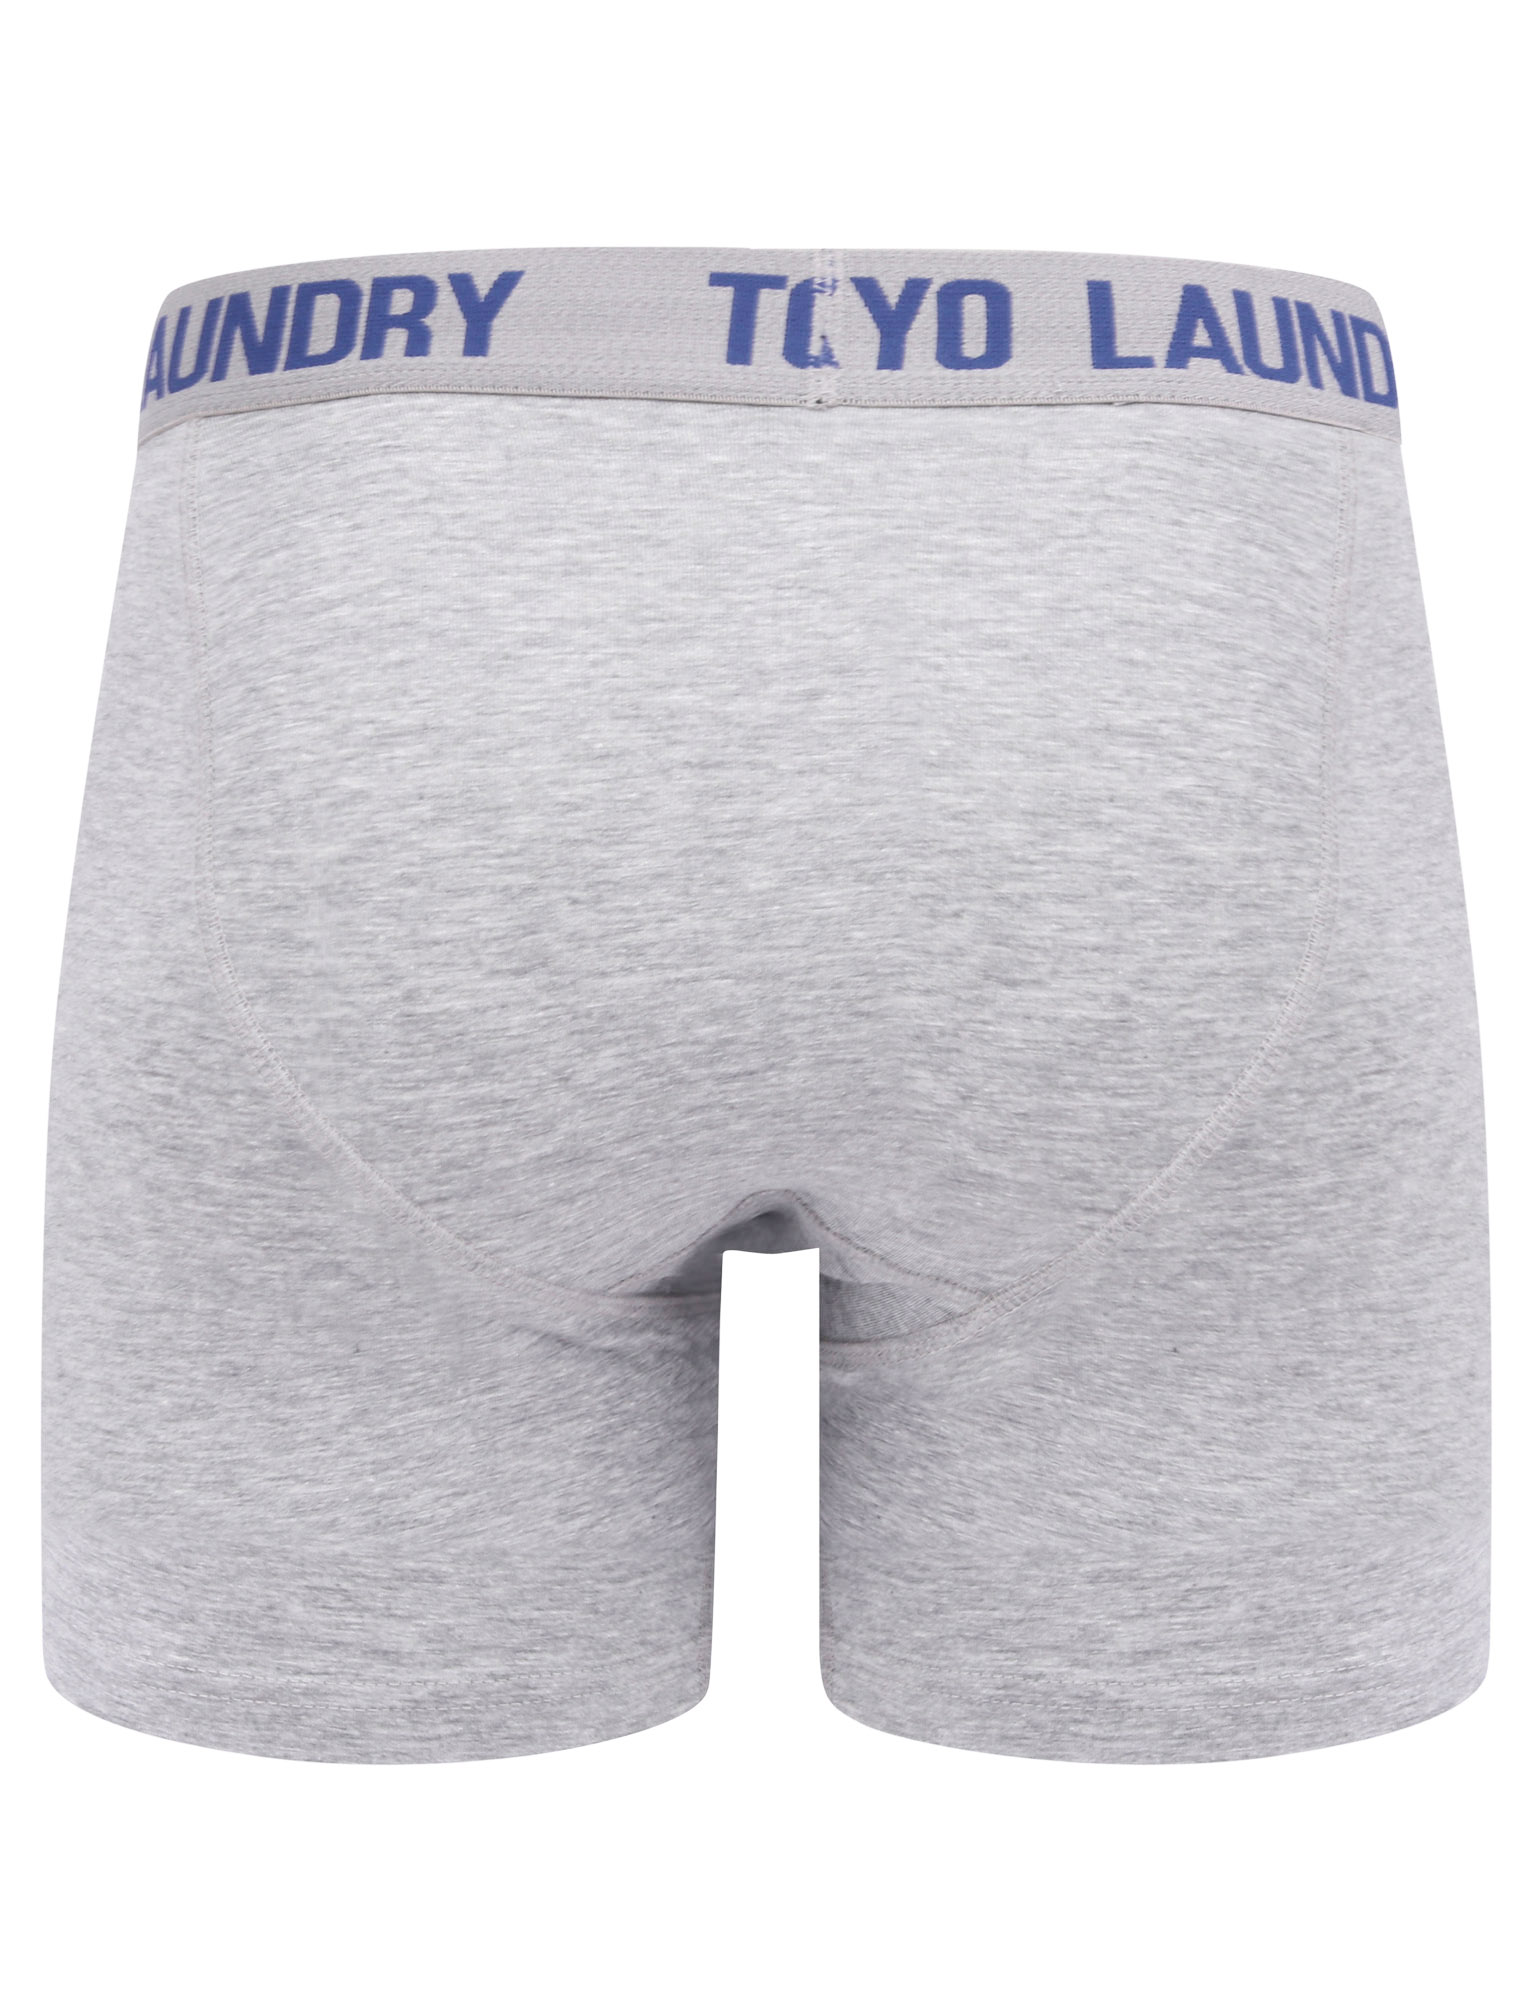 New Mens Tokyo Laundry Wetherby (2 Pack) Cotton Rich Boxer Shorts Set  